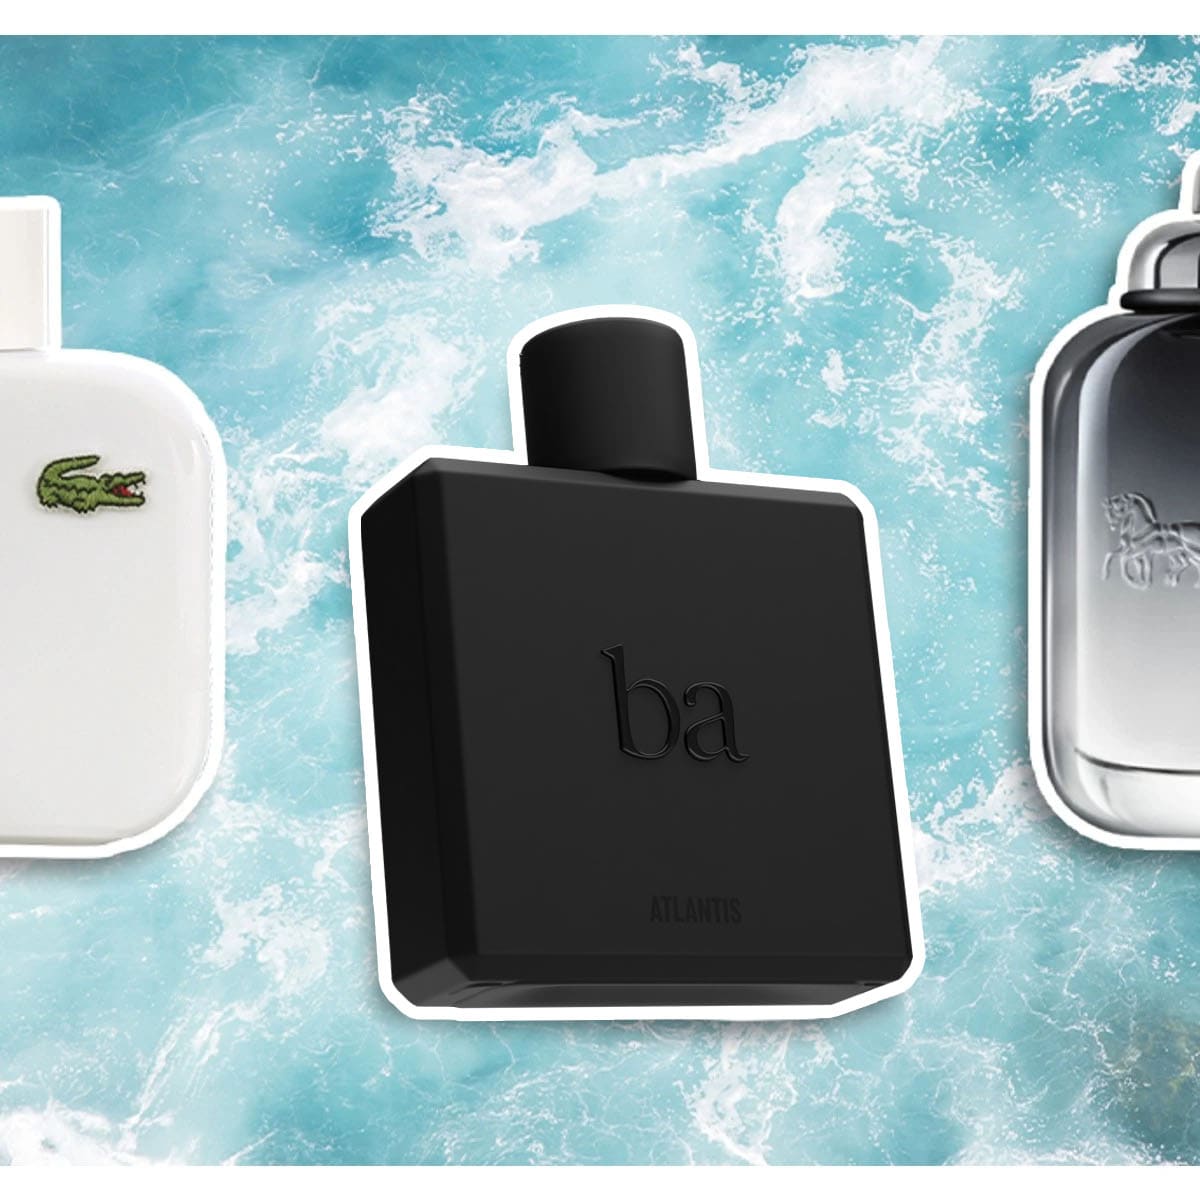 These Are the Best Colognes of the Year, According to Experts